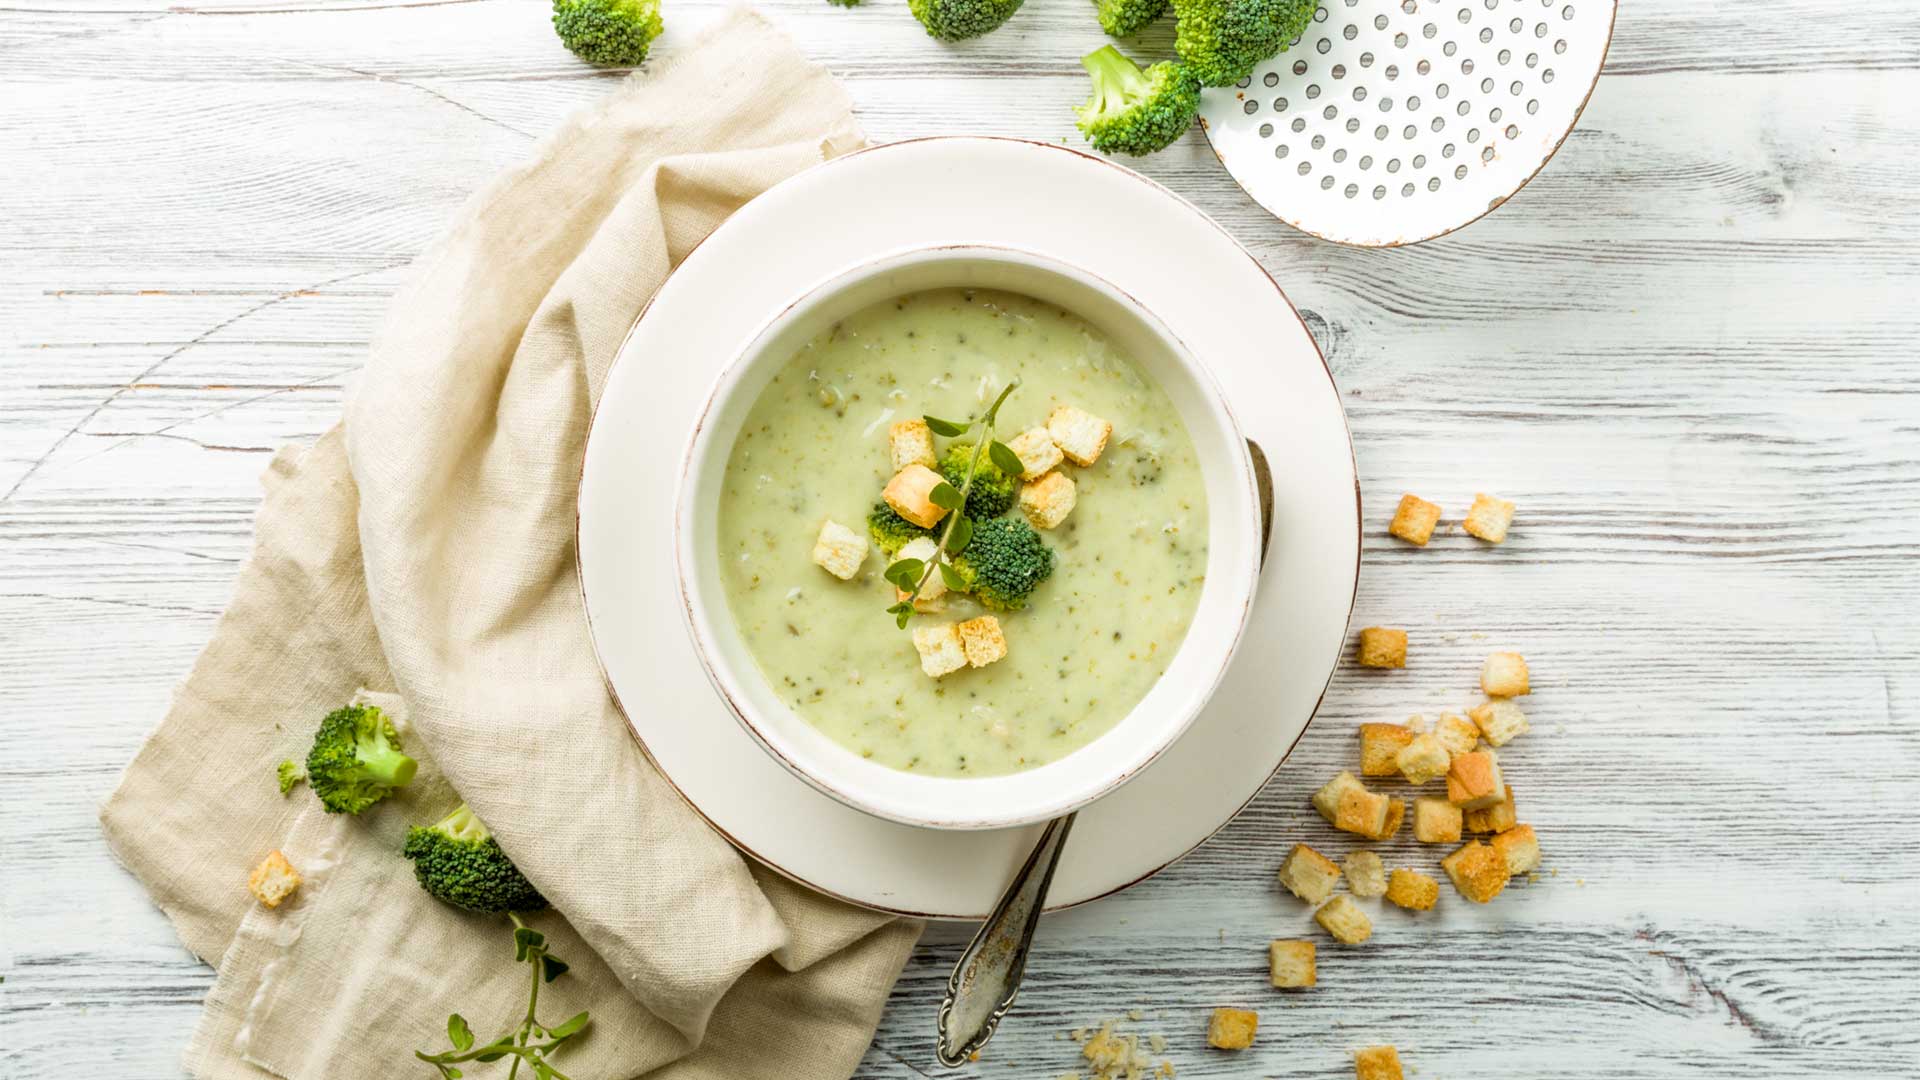 fresh broccoli soup with croutons and herbs in a bowl